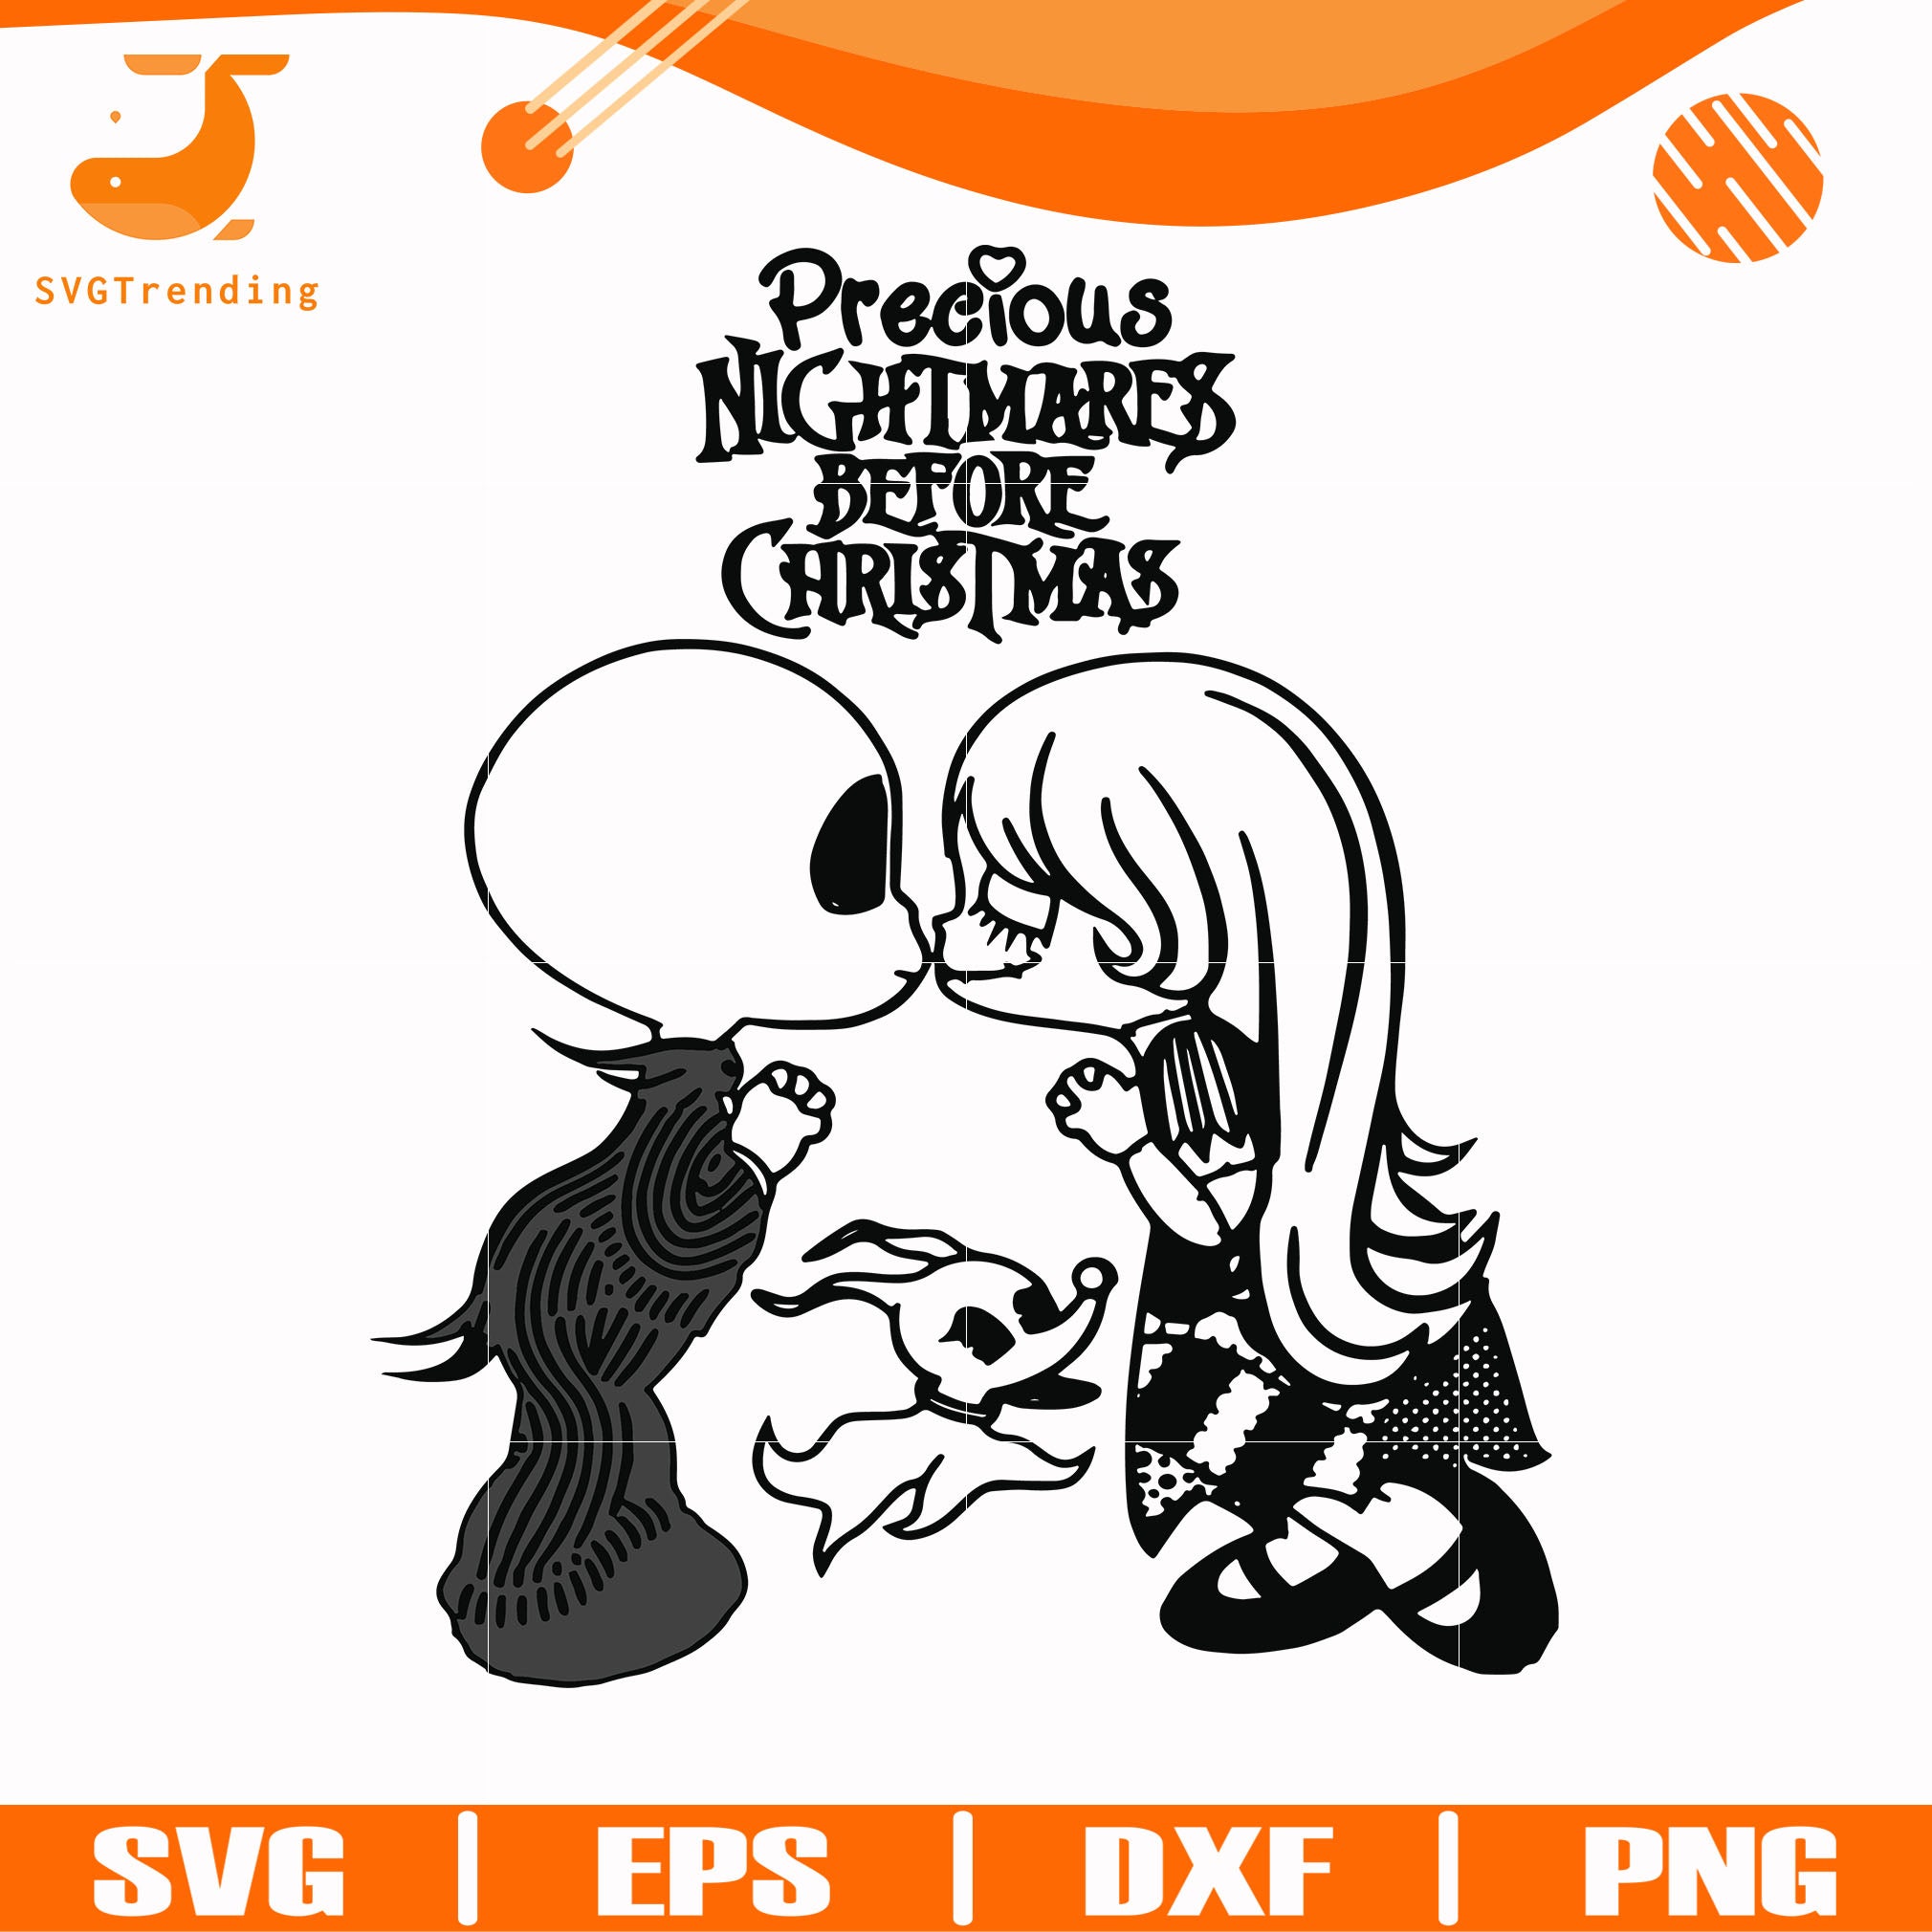 Download Precious nightmare before Christmas svg, png, dxf, eps ...